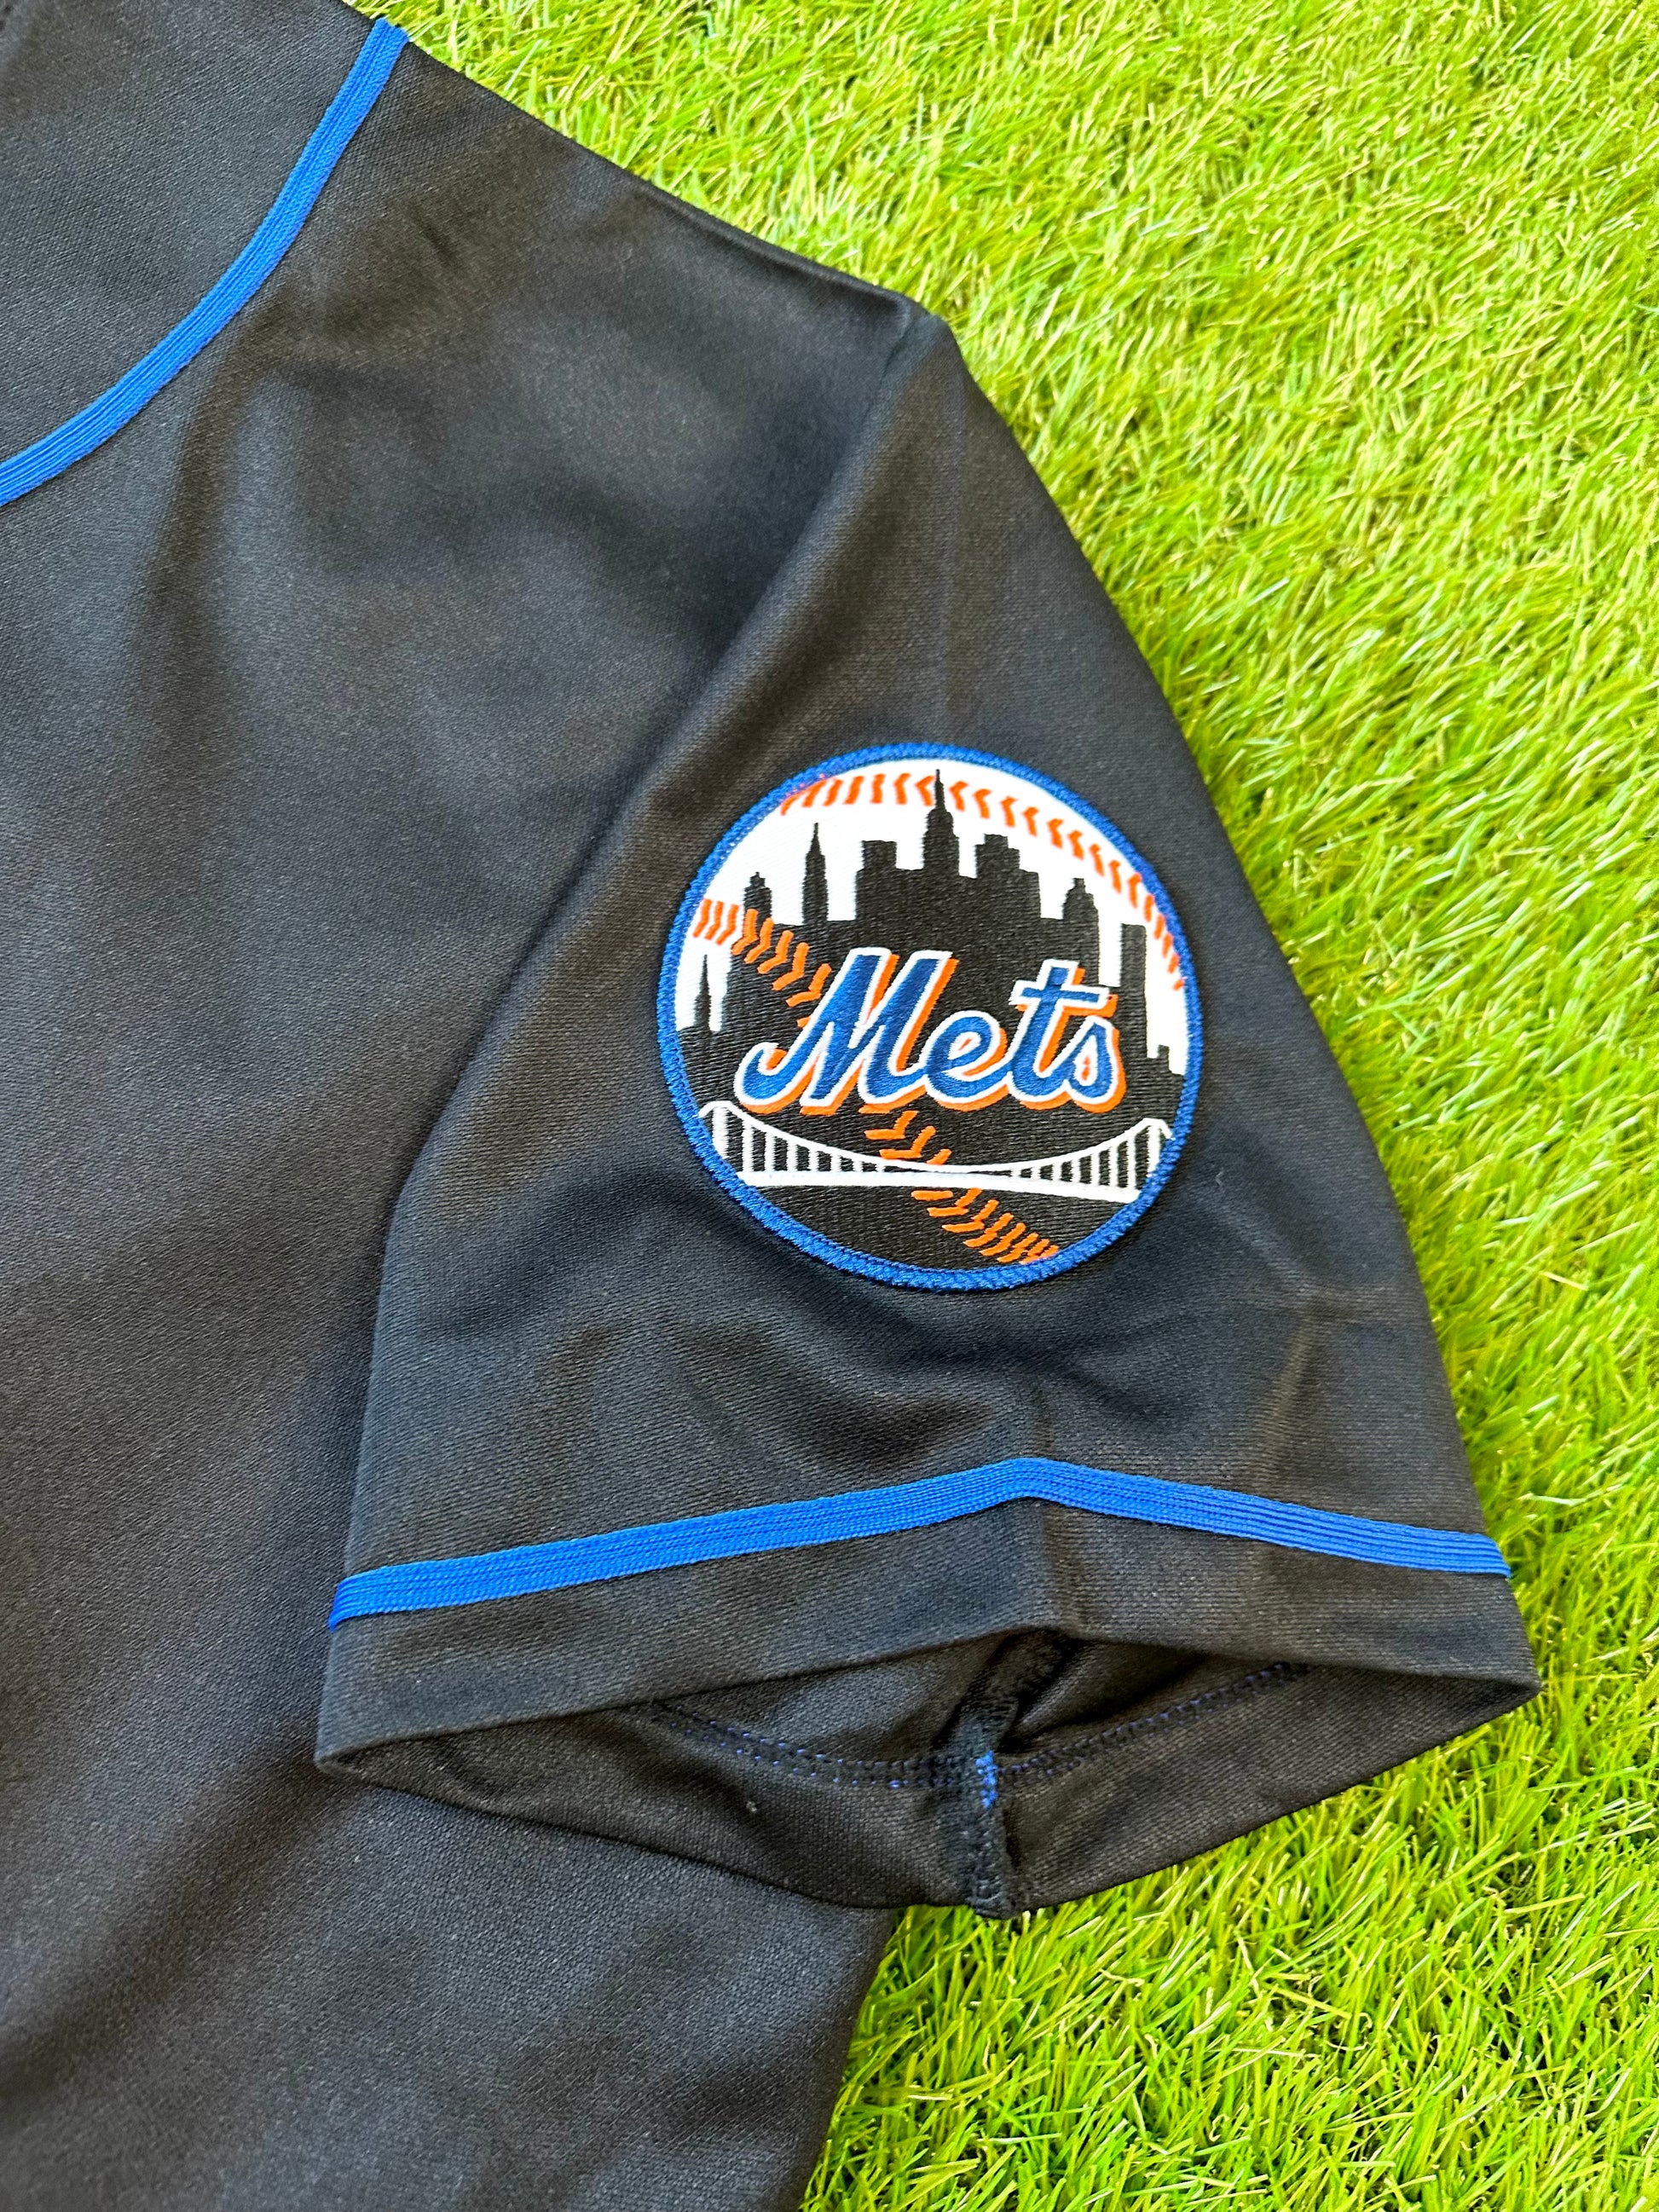 Vintage New York Mets Mike Piazza Baseball Jersey Black Mens Size 3X Sewn